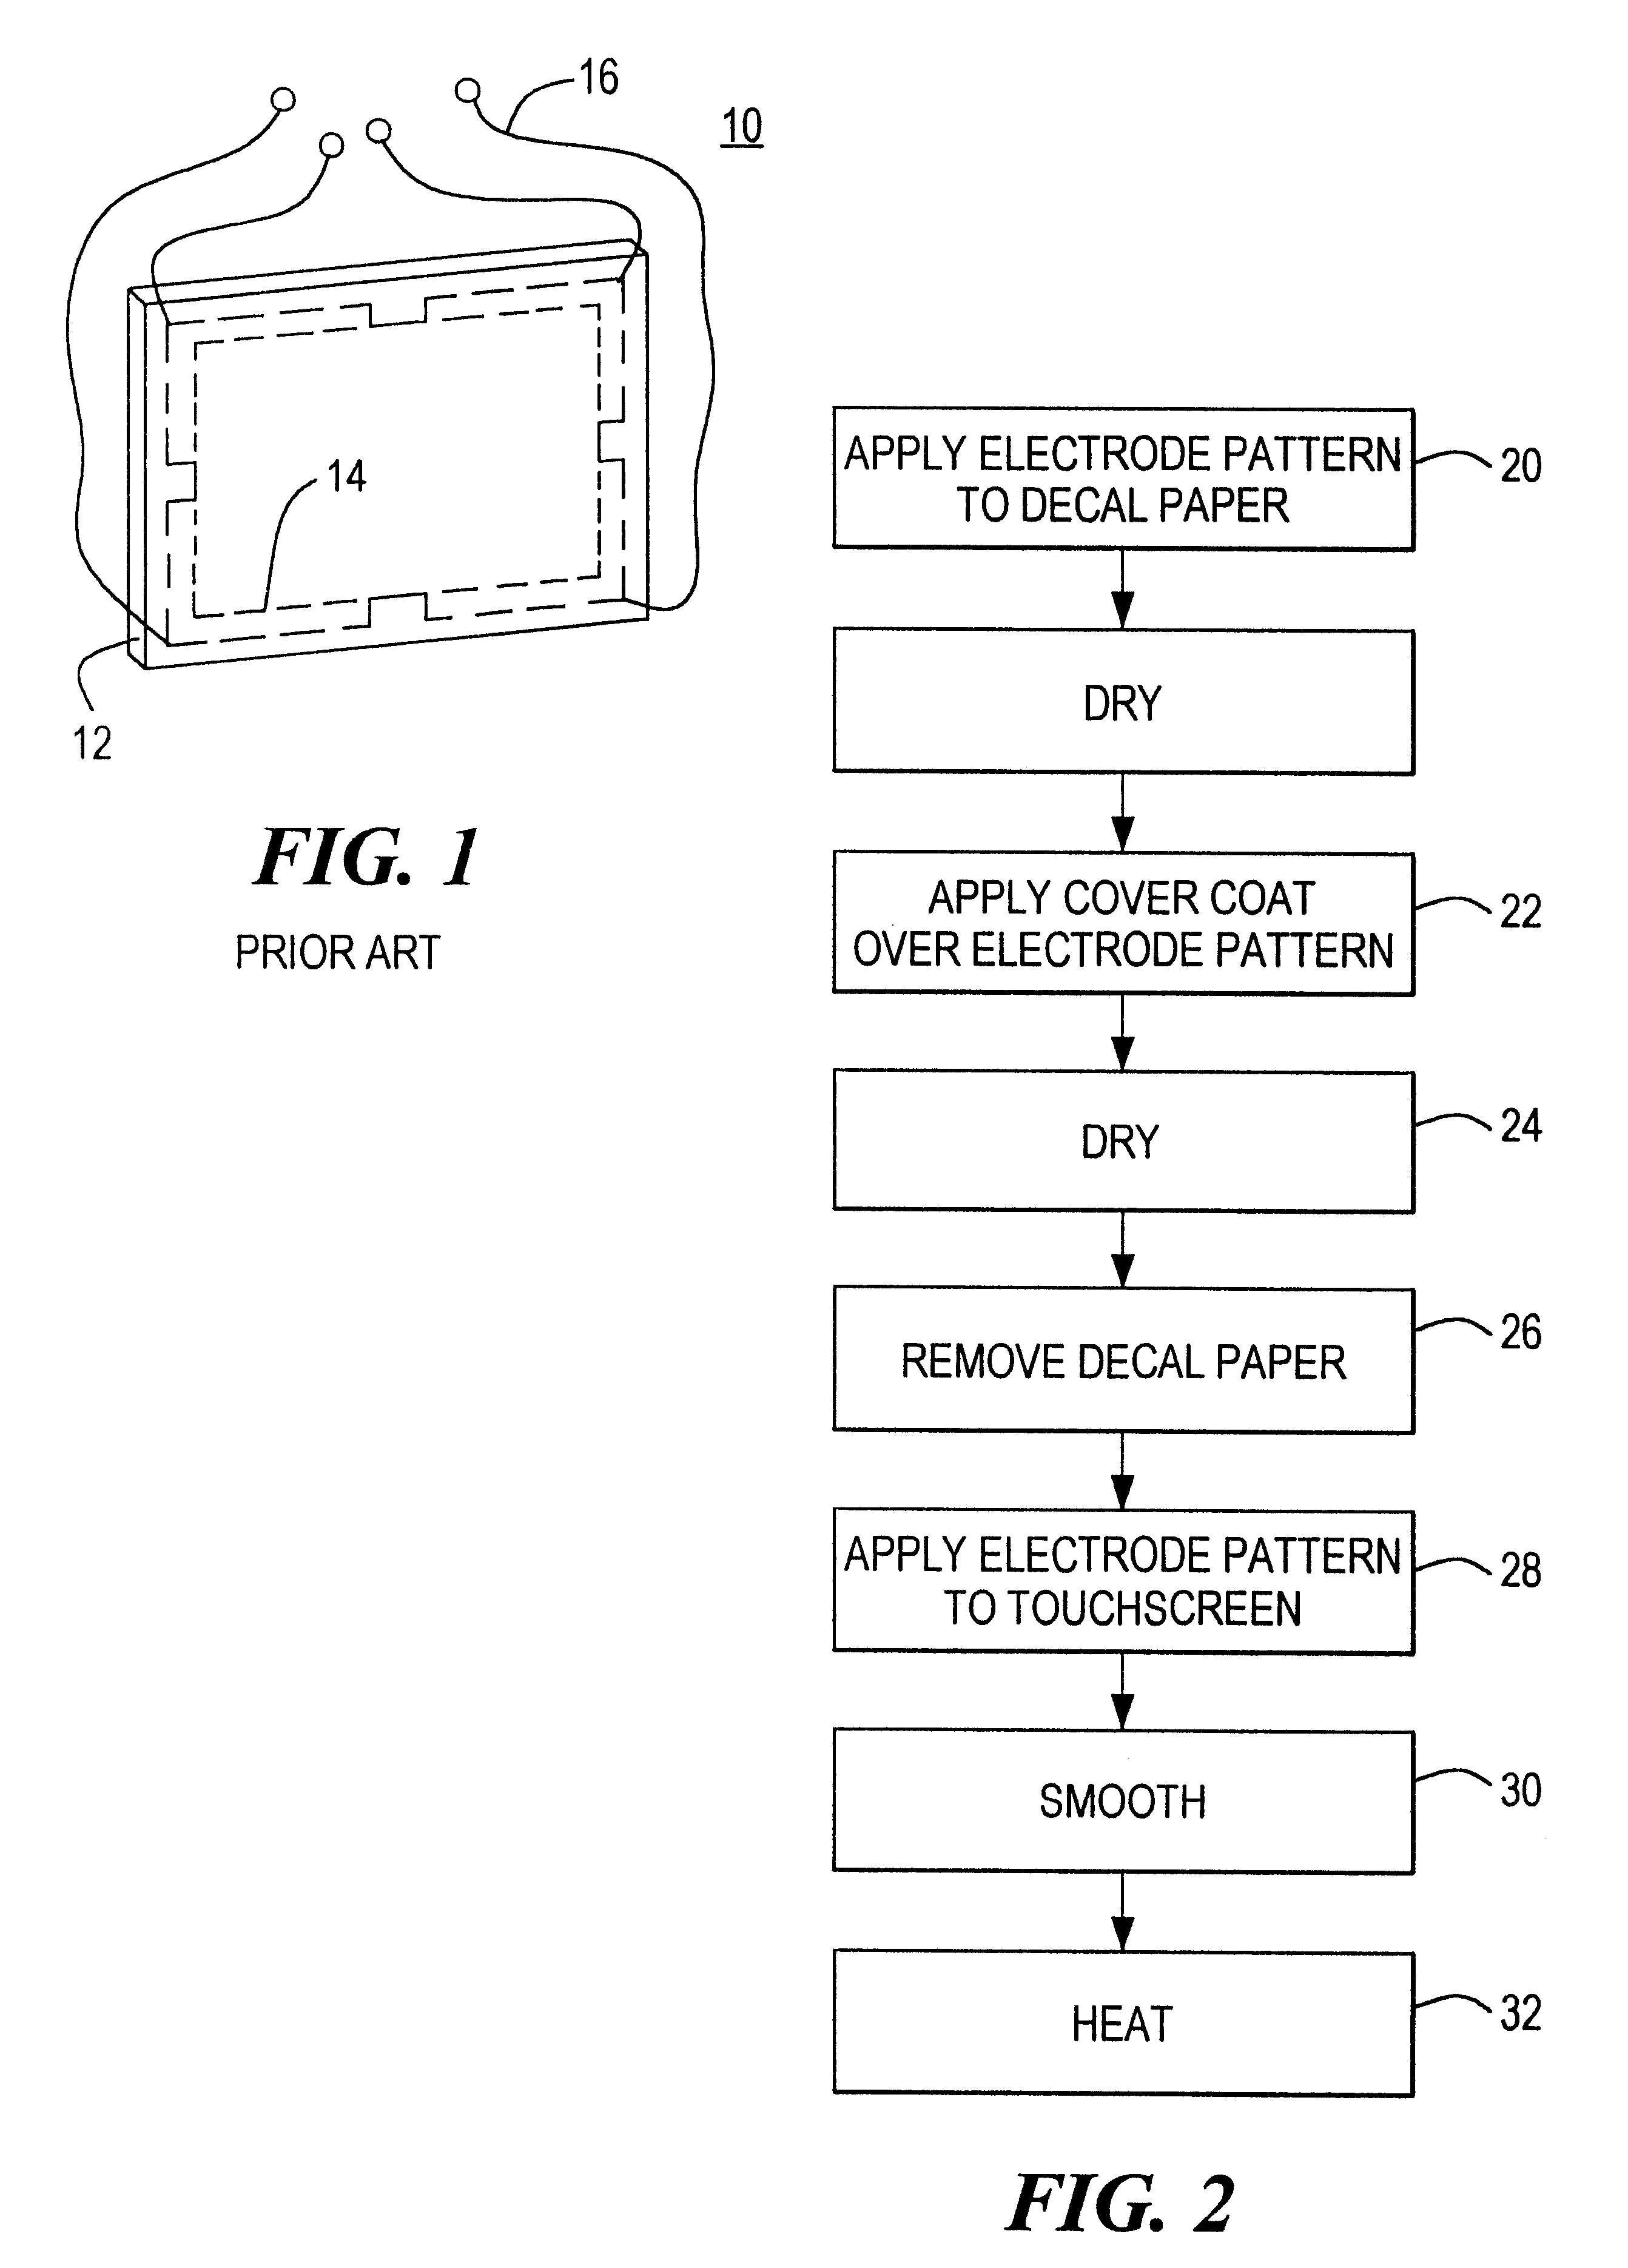 Method of applying an edge electrode pattern to a touch screen and a decal for a touch screen